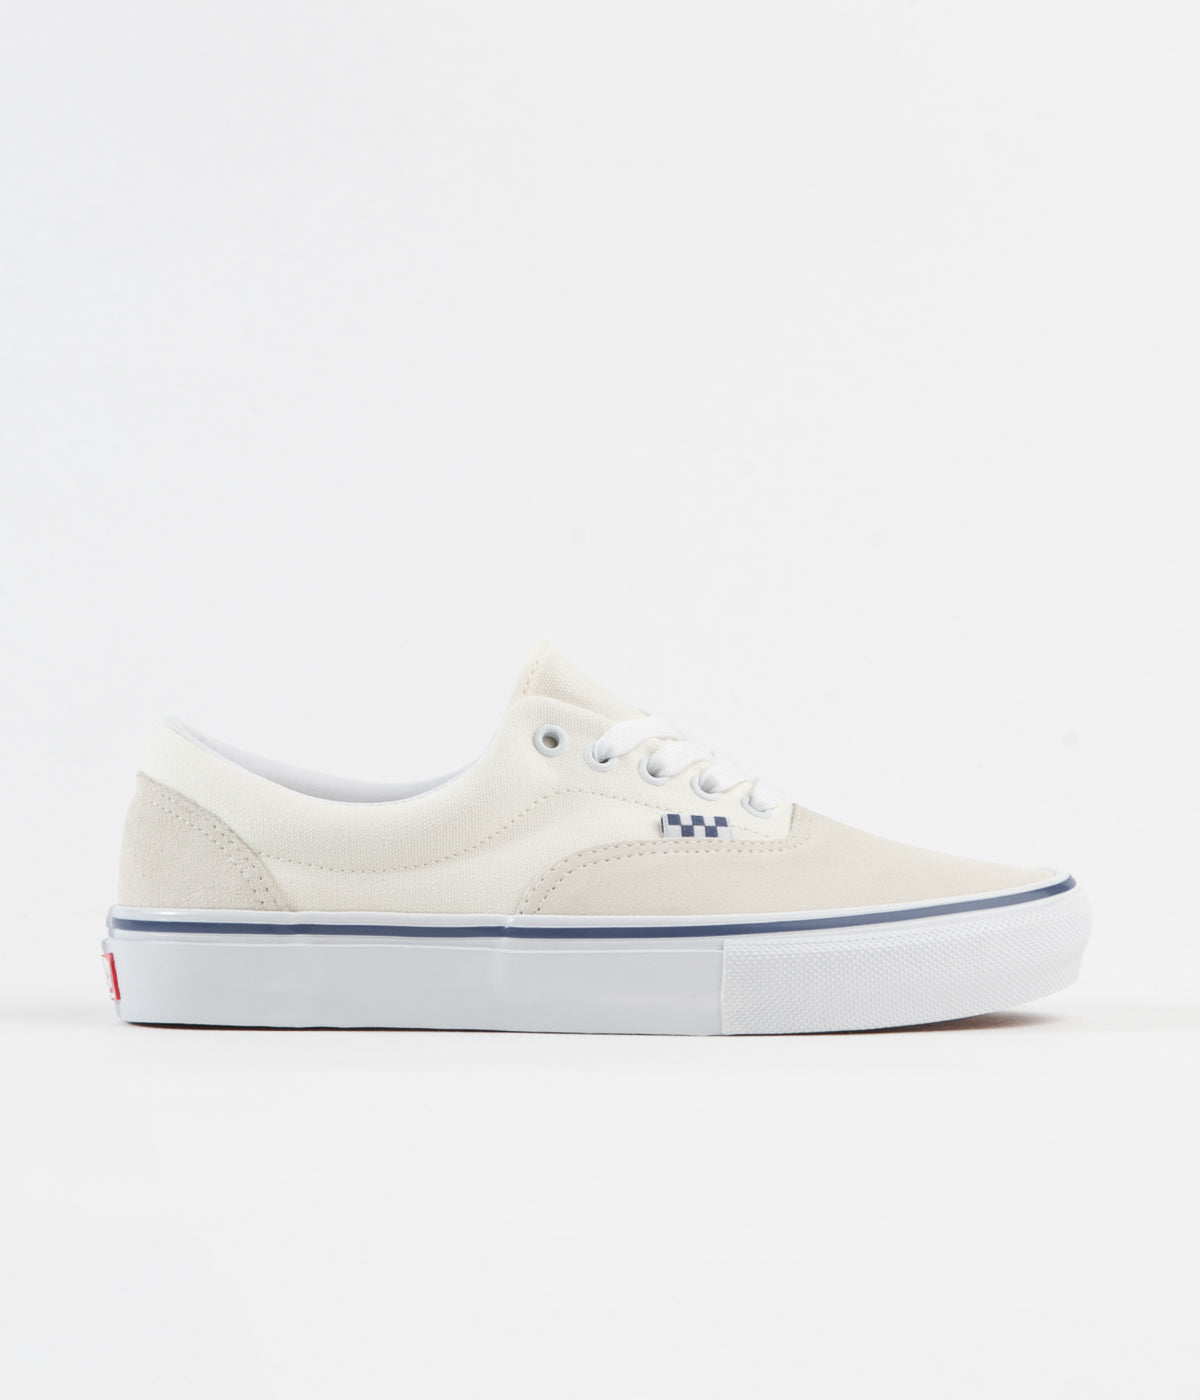 Vans Skate Period Shoes - Off White 